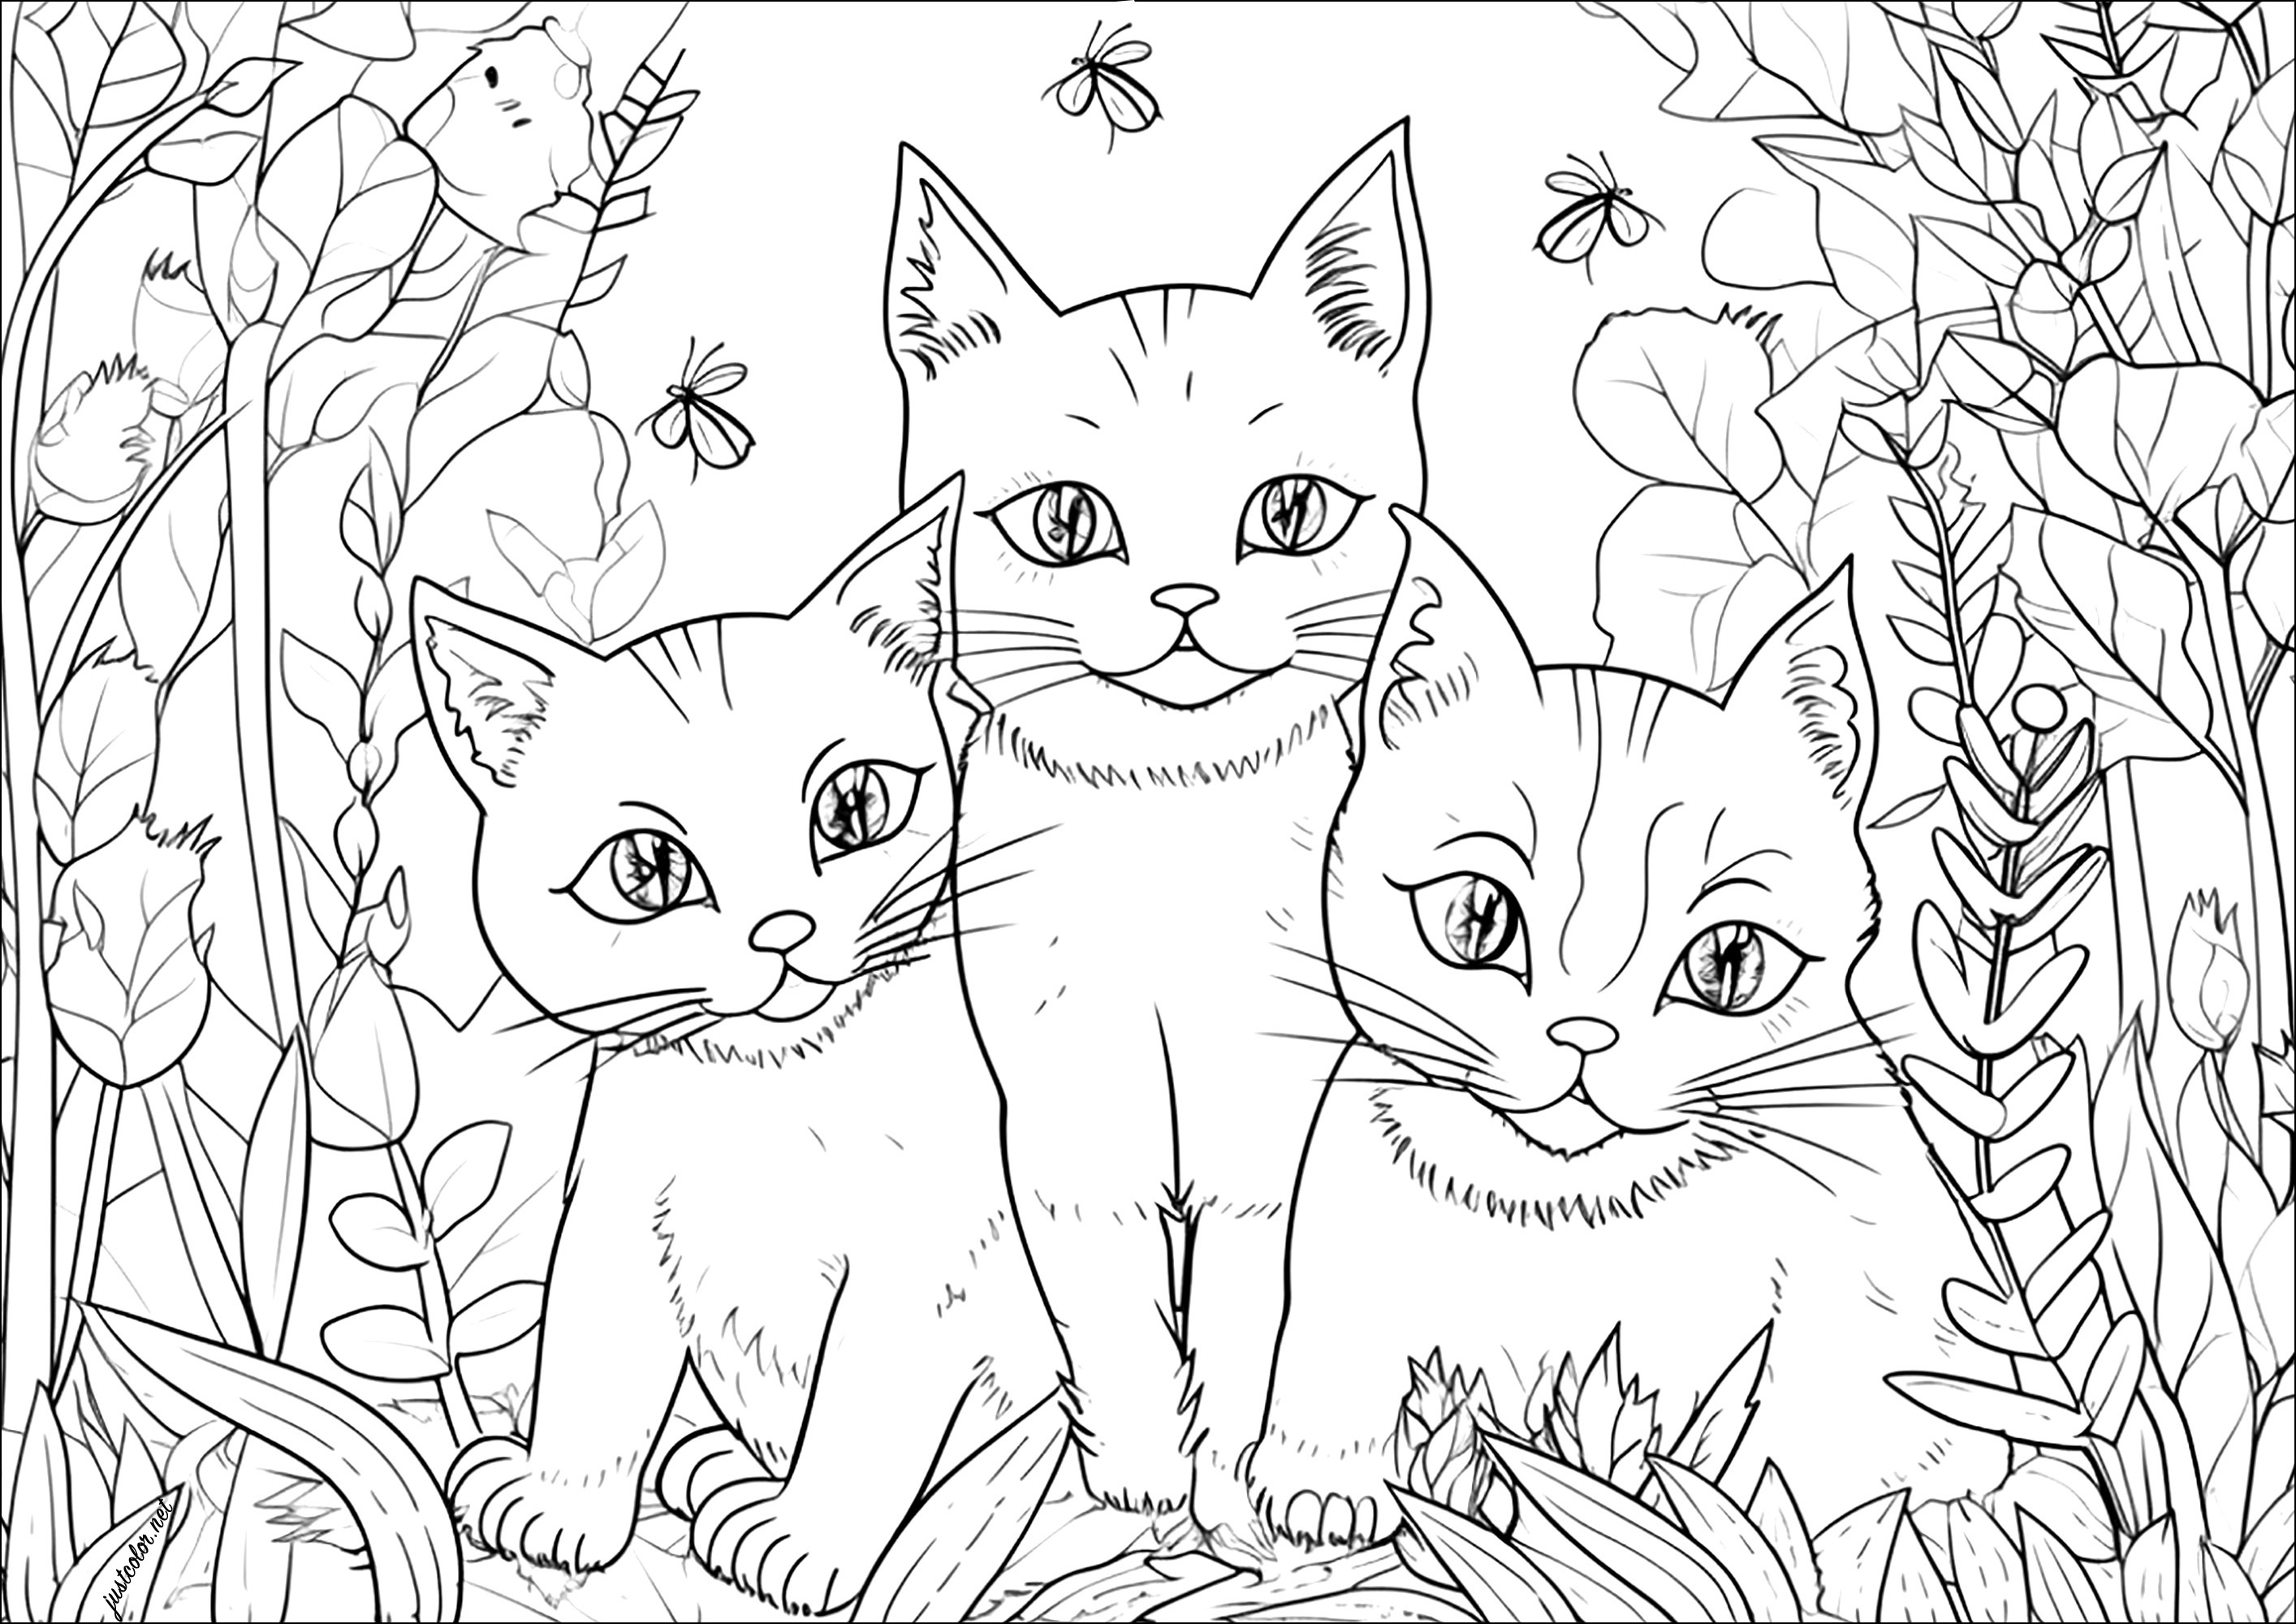 Three pretty cats in a garden. In a pretty garden setting, a few insects surround these three beautiful cats, drawn in a very realistic style.